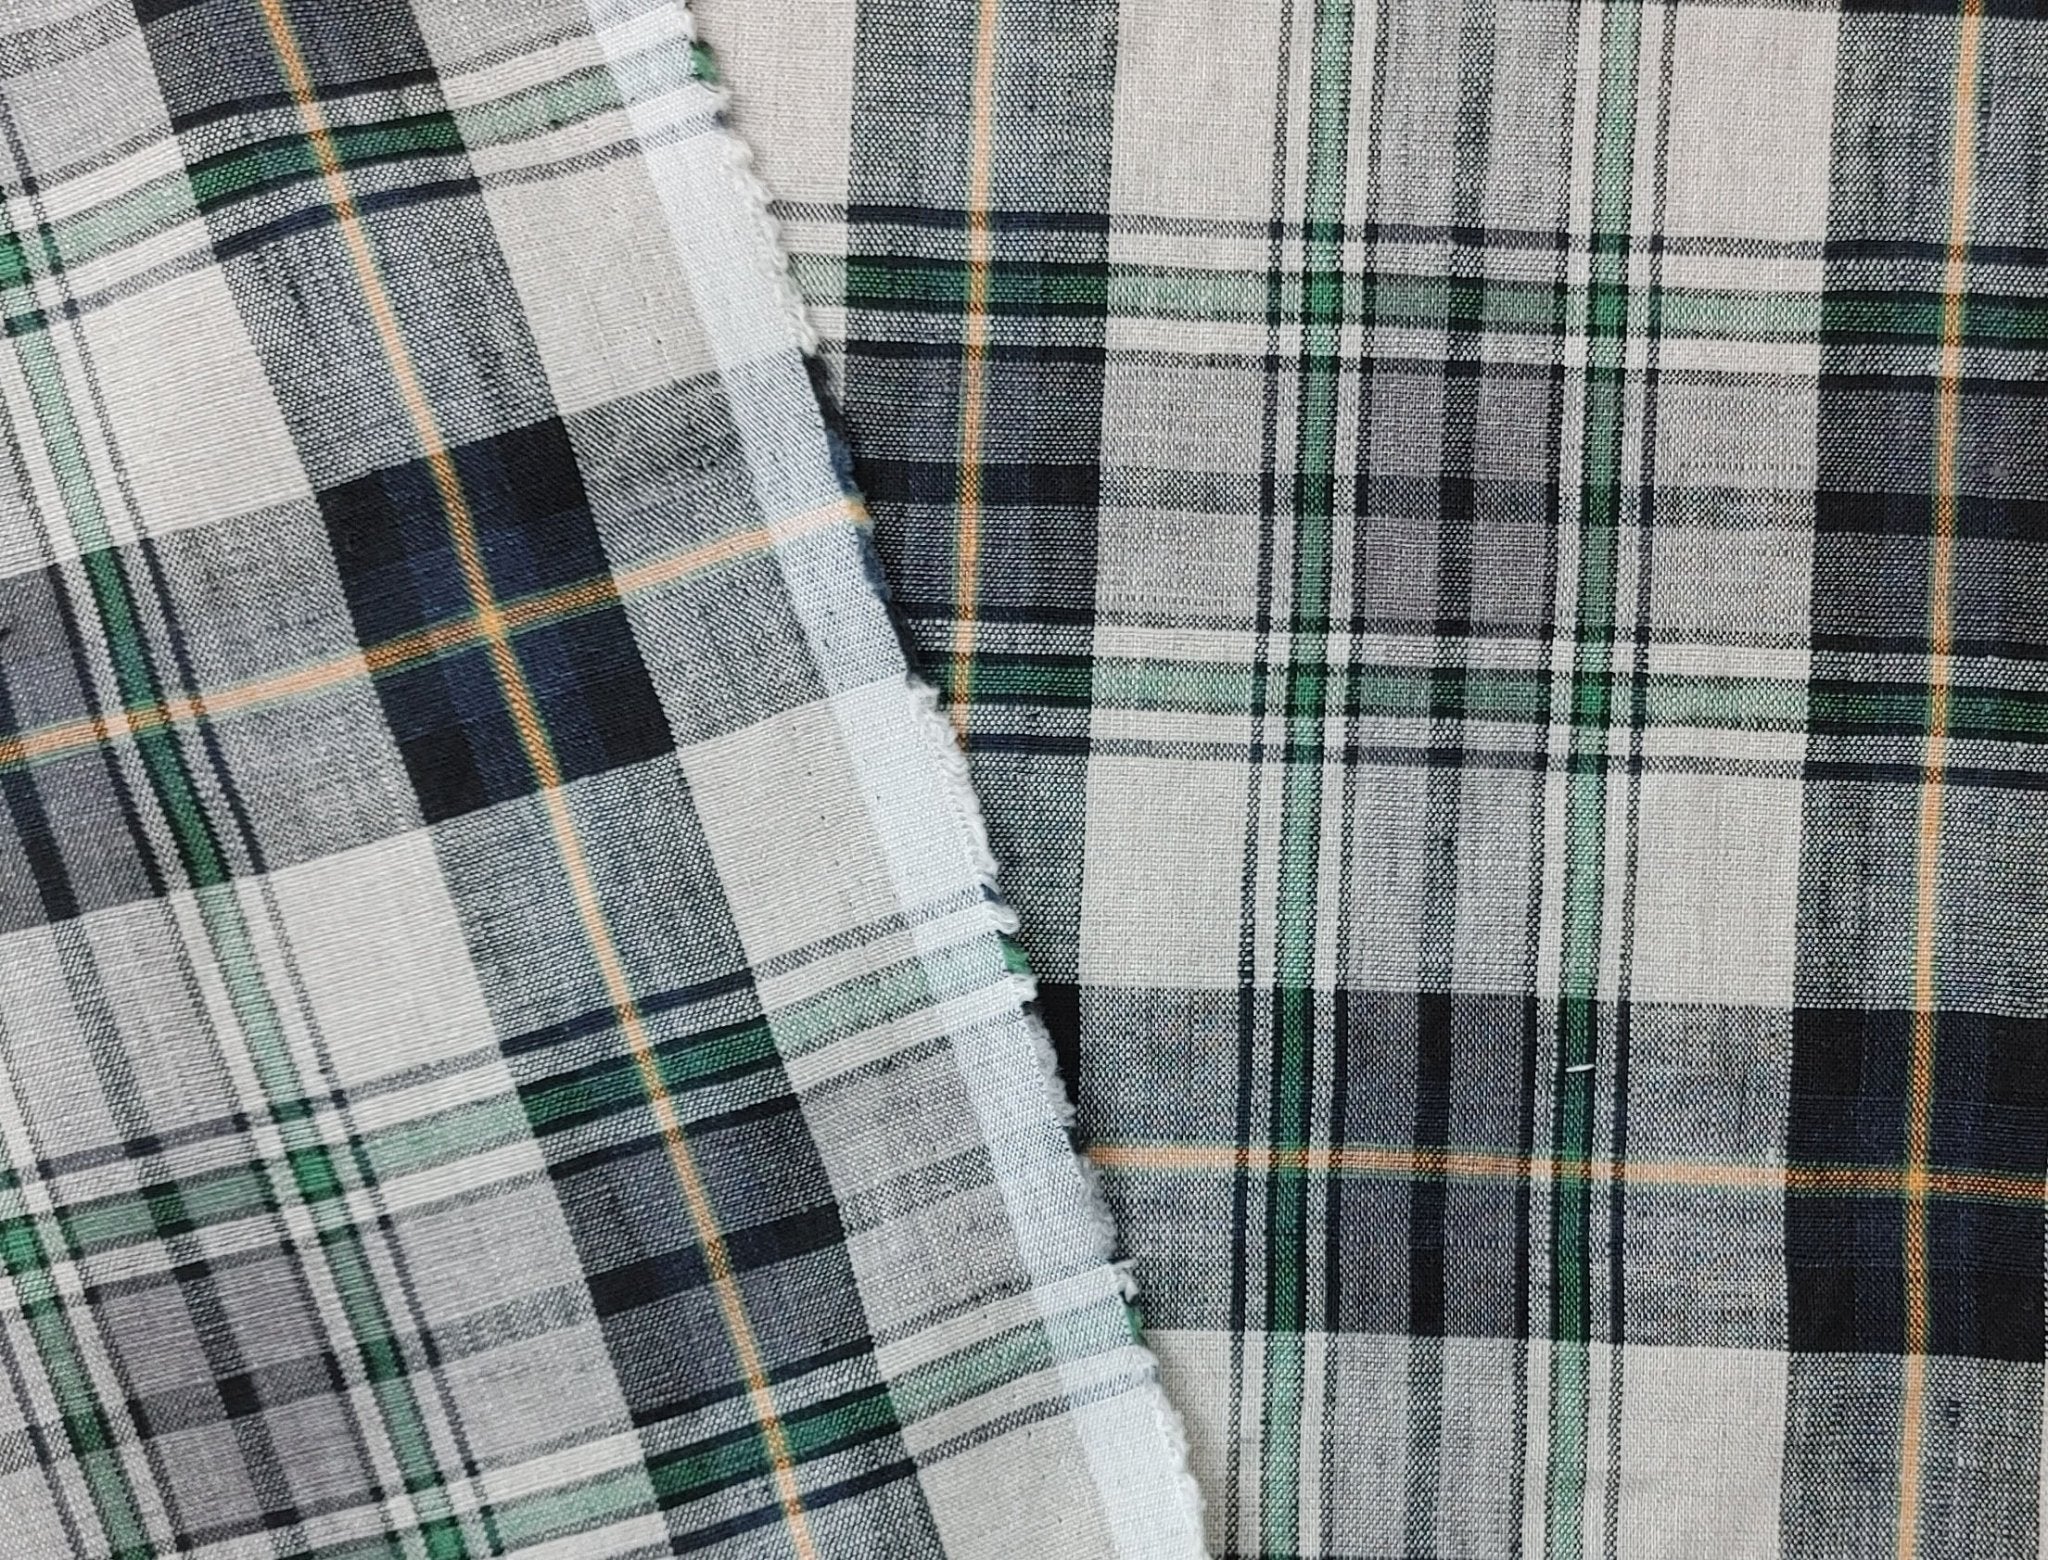 100% Linen Fabric in Medium Weight with Classic Plaid Design 7155 - The Linen Lab - Beige